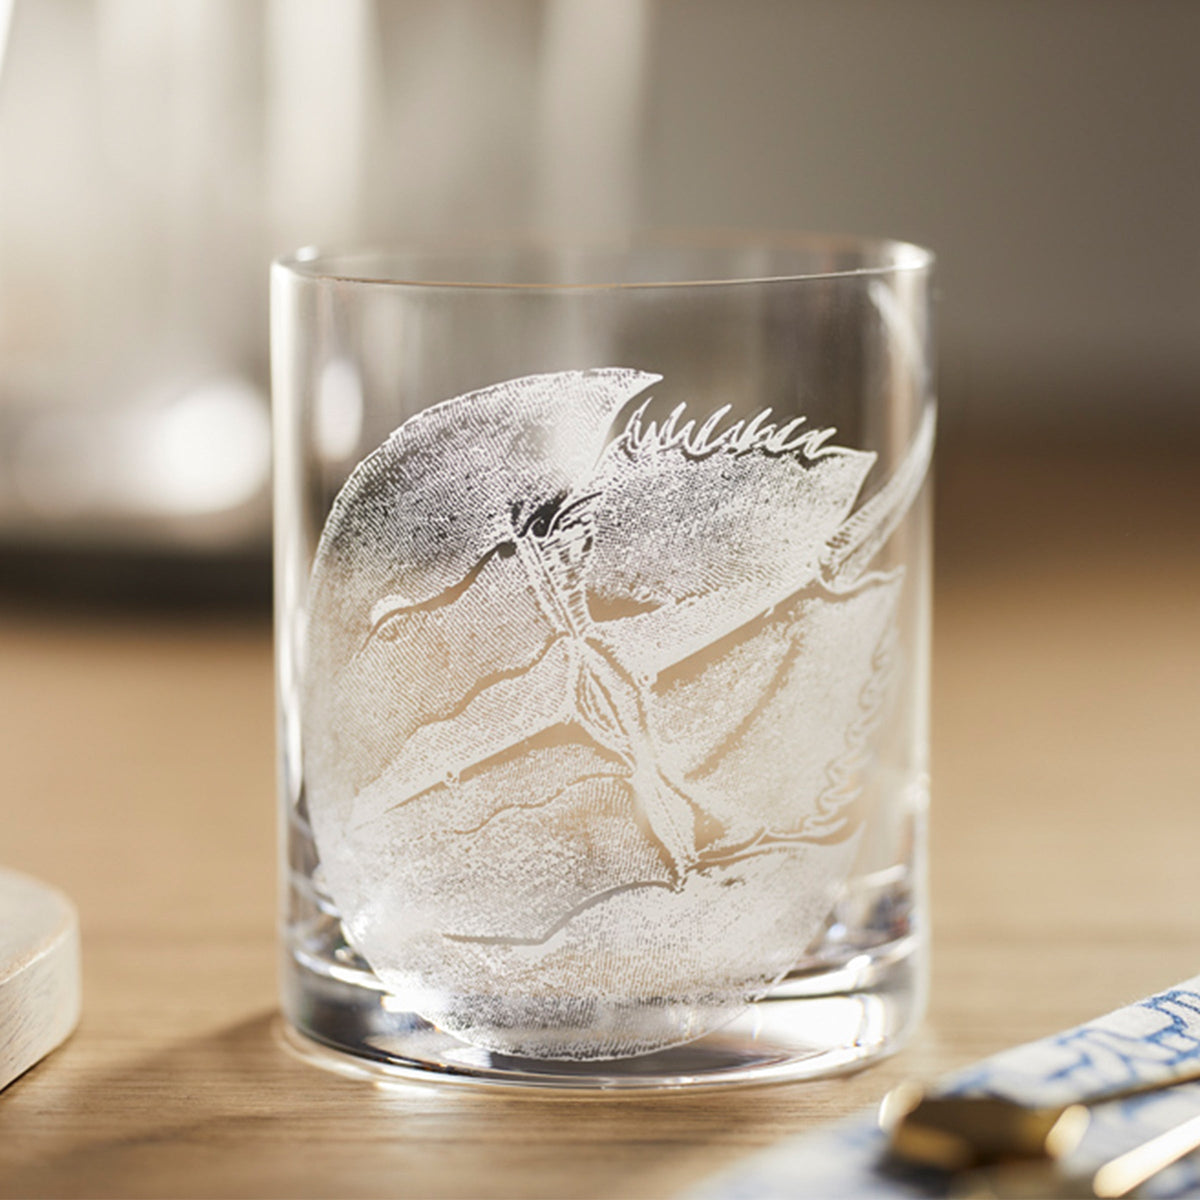 A Horseshoe Crab Short Drink Glass by Caskata with a drawing of a horse on it.